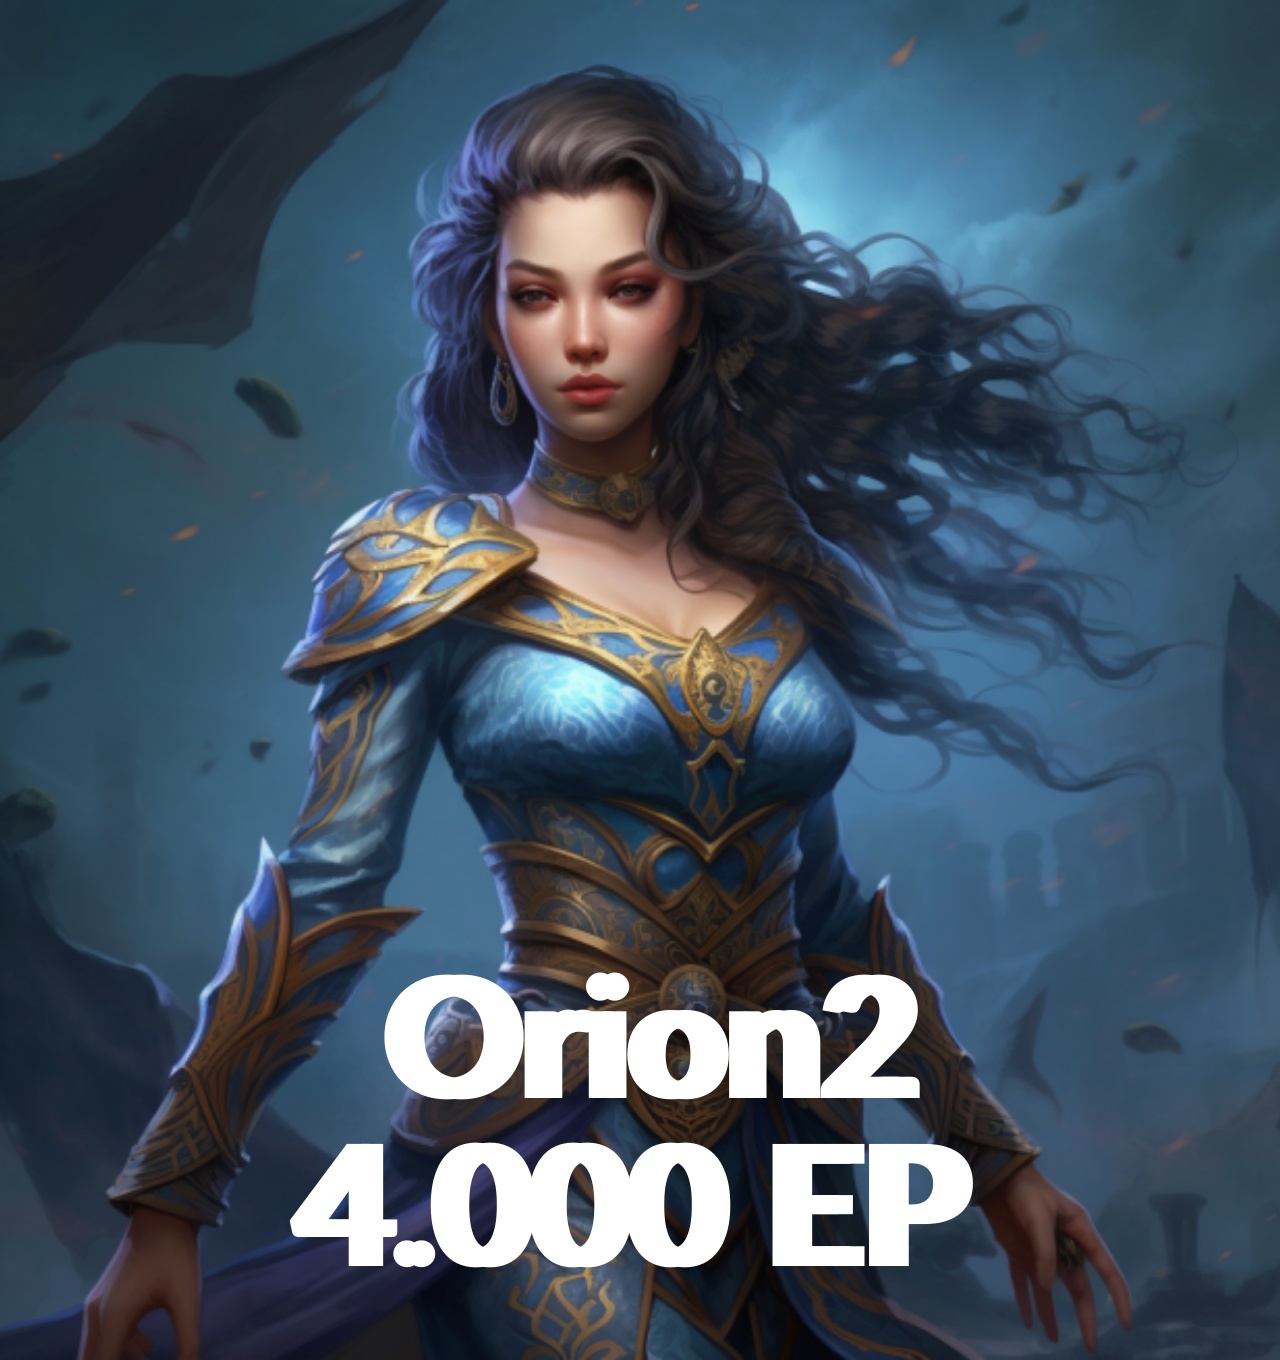 Orion2 4.000 EP